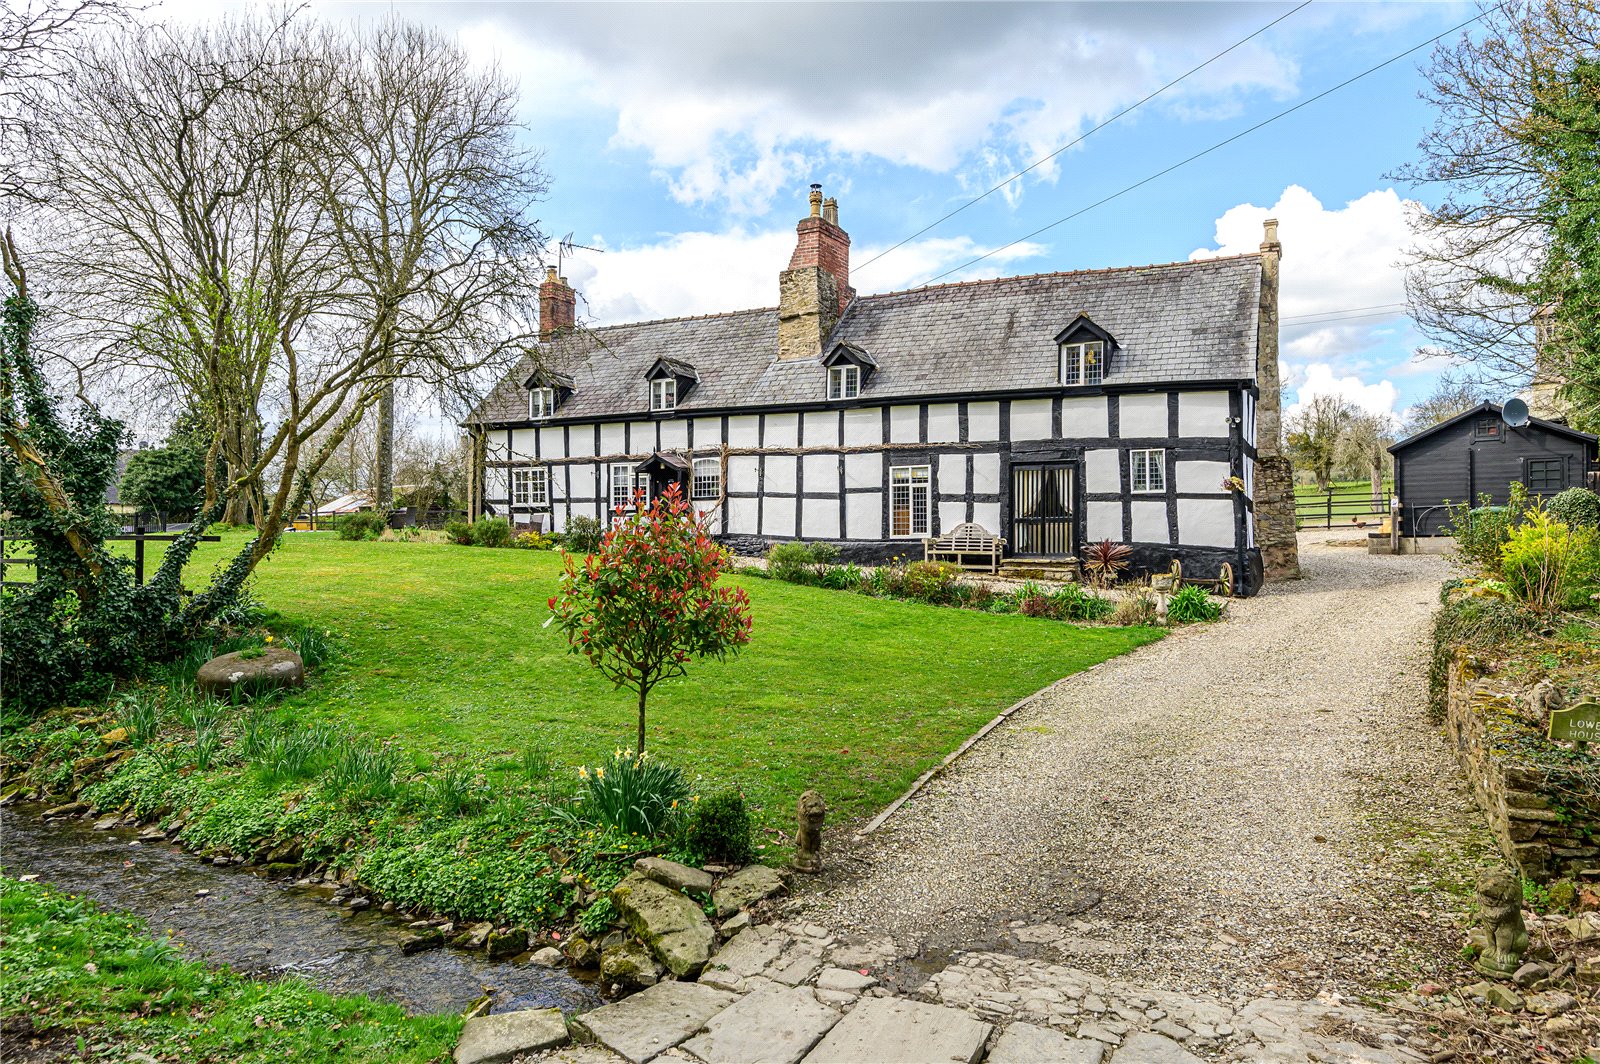 5 Bedroom Equestrian For Sale in Burrington, Ludlow, Herefordshire, SY8 2HT